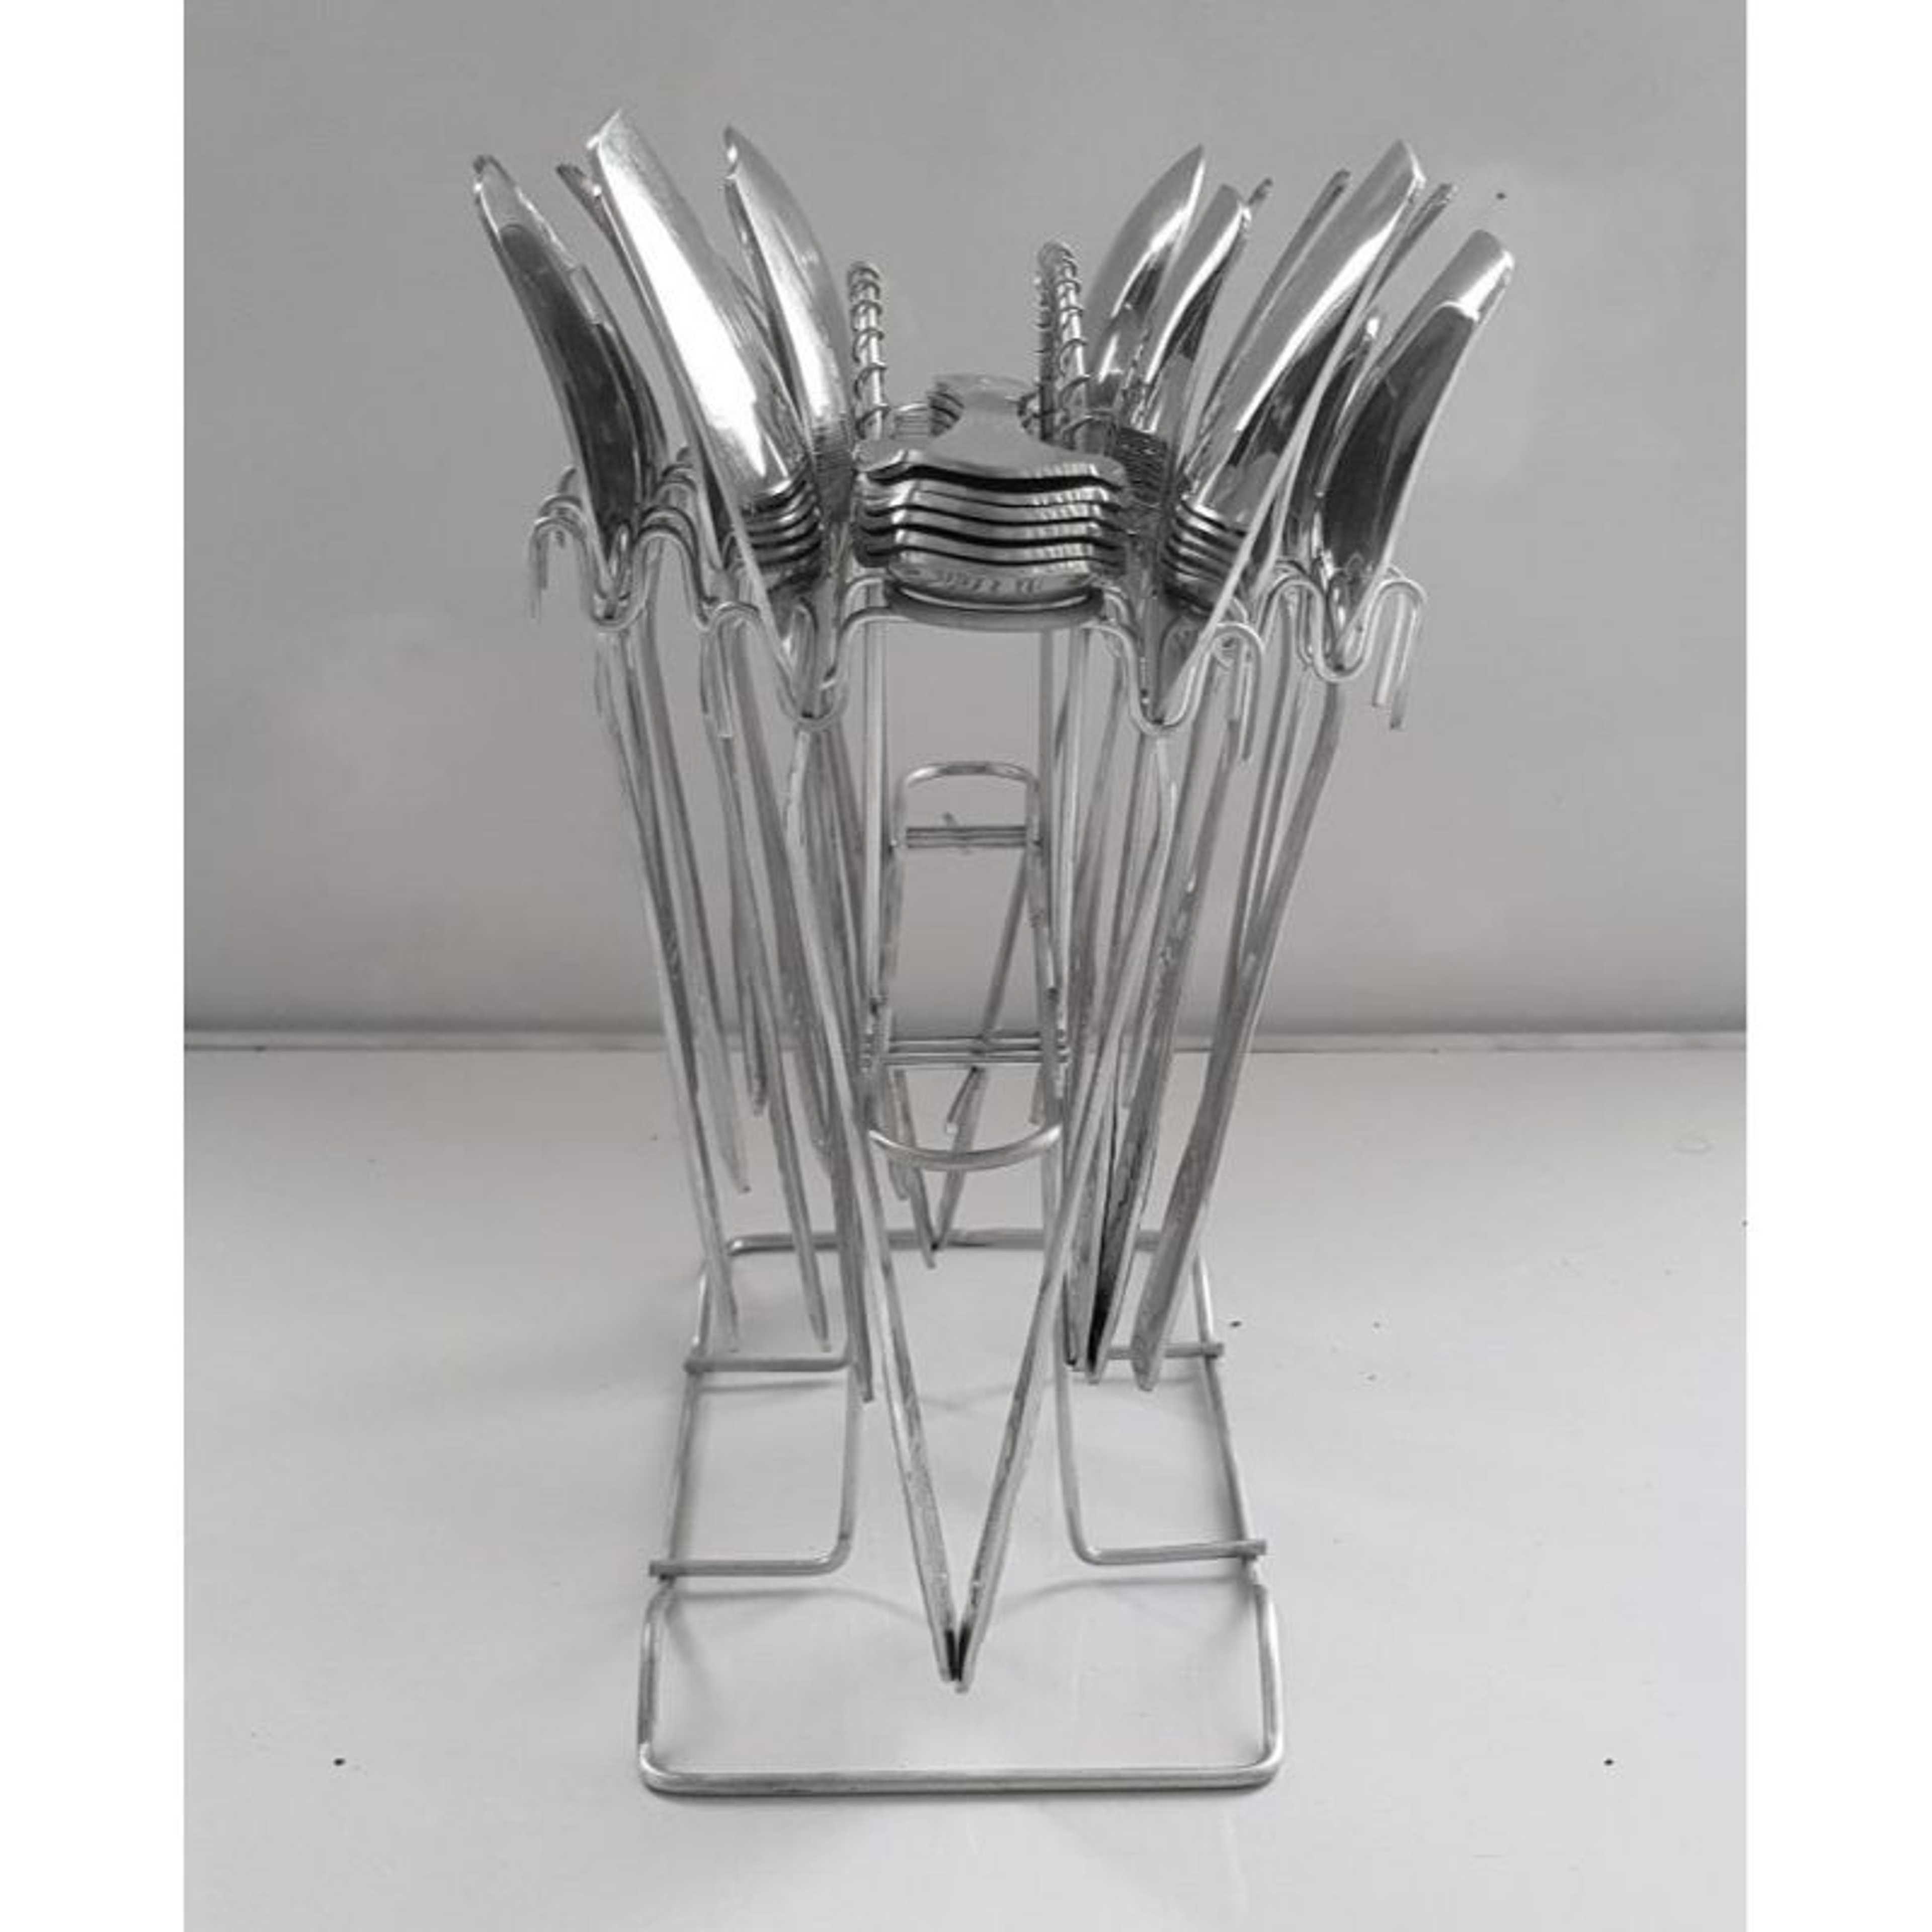 29 Pcs High Quality Stainless Steel Cutlery Set with Spoons, Forks, Knifes and Holder Stand